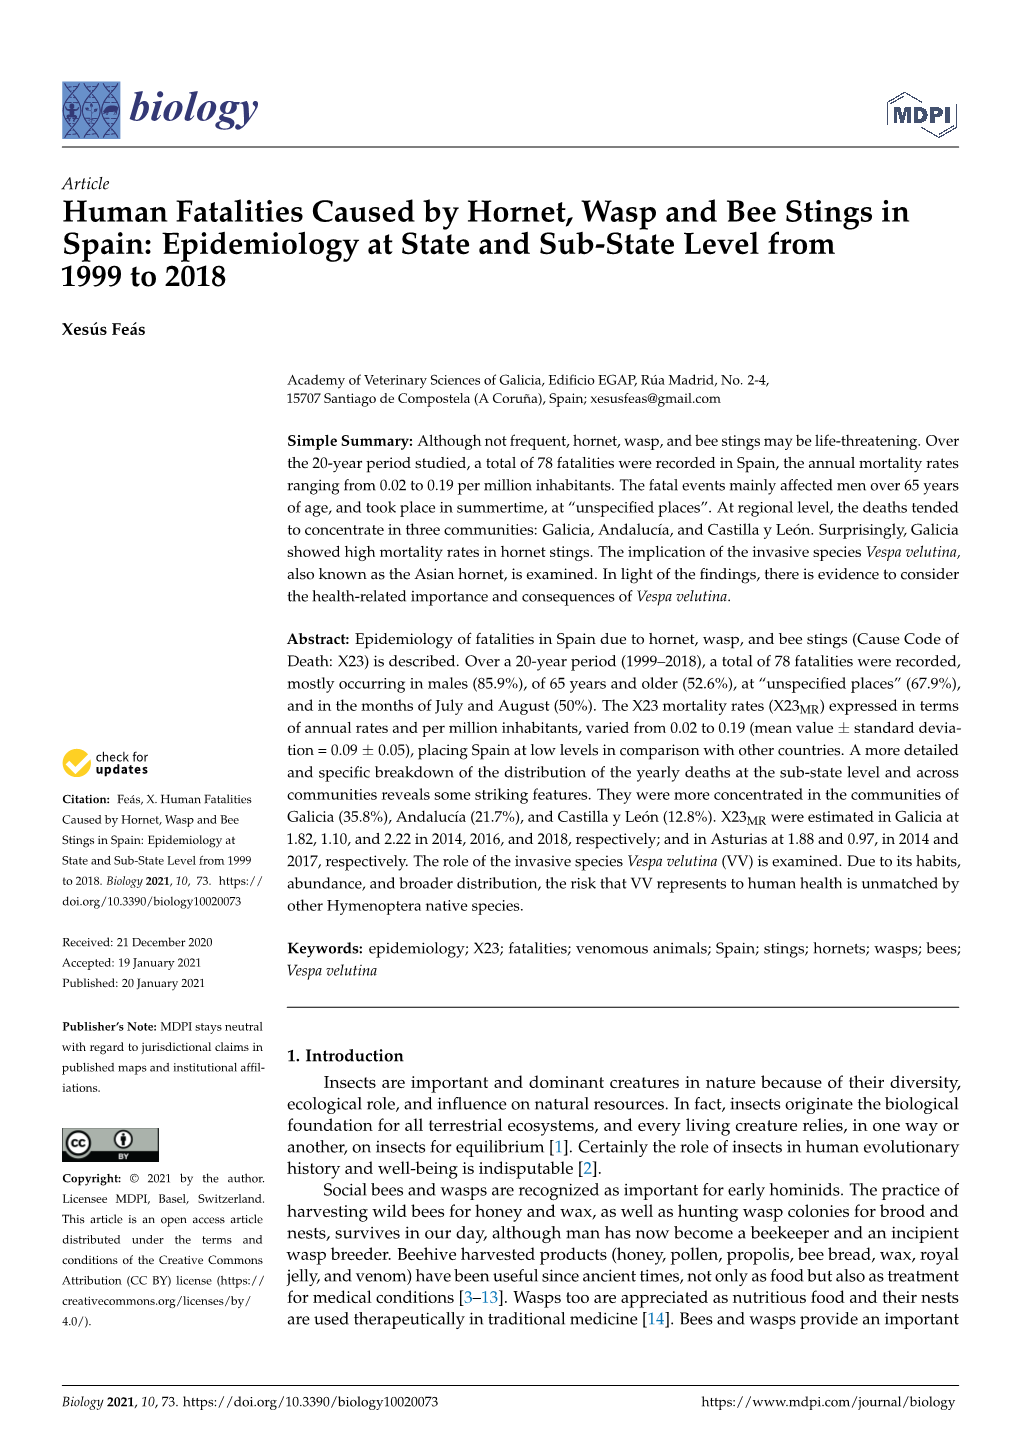 Human Fatalities Caused by Hornet, Wasp and Bee Stings in Spain: Epidemiology at State and Sub-State Level from 1999 to 2018